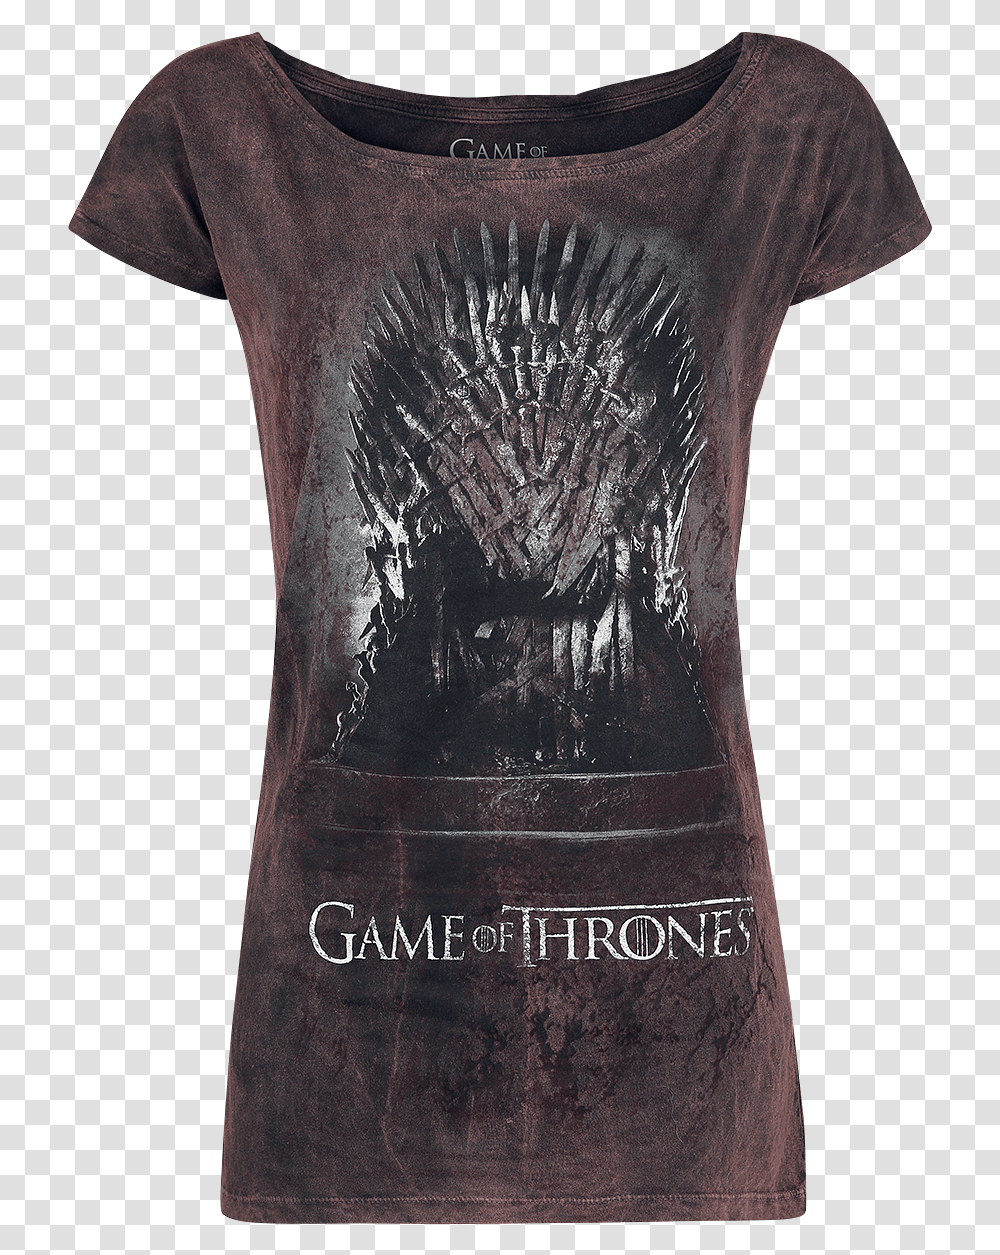 Iron Throne Game Of Thrones Cartoon Game Of Thrones Iron Throne, Clothing, Apparel, Cushion, T-Shirt Transparent Png